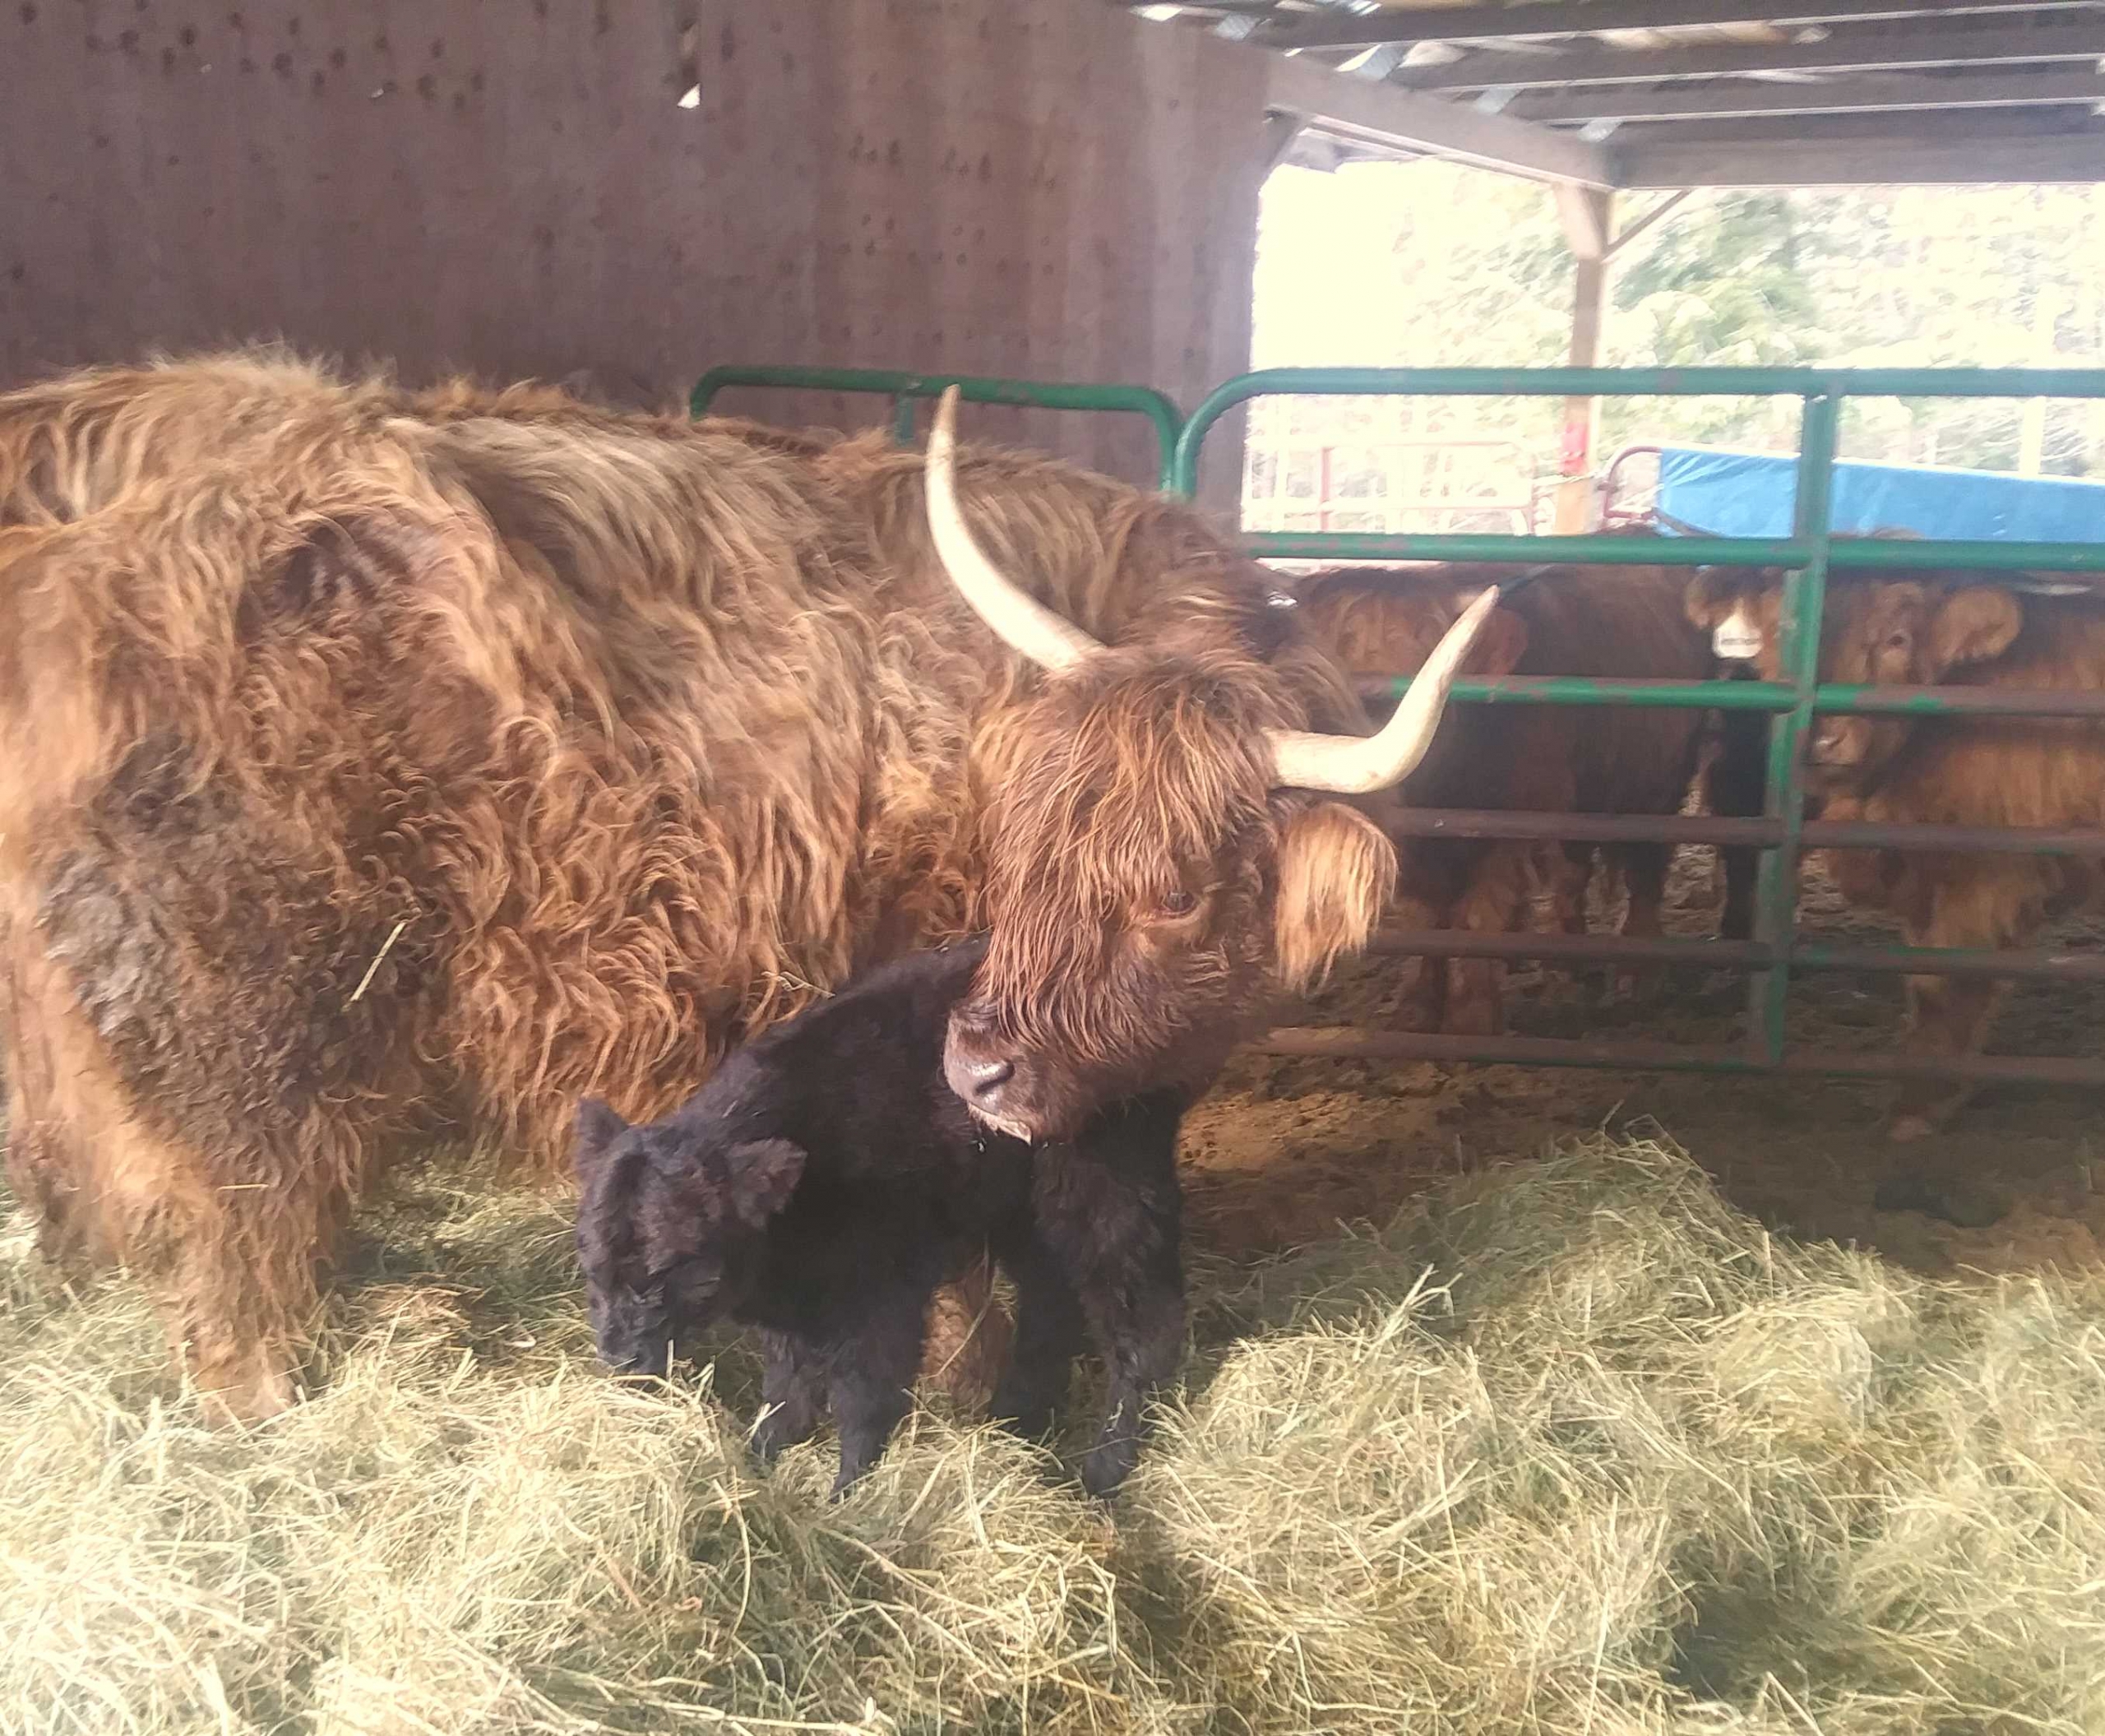 Puff and her calf, Lucy, in Miles Smith Farm’s holding pen. They were reunited after new-born Lucy warmed up and dried off in the farmhouse kitchen where she also took her first steps